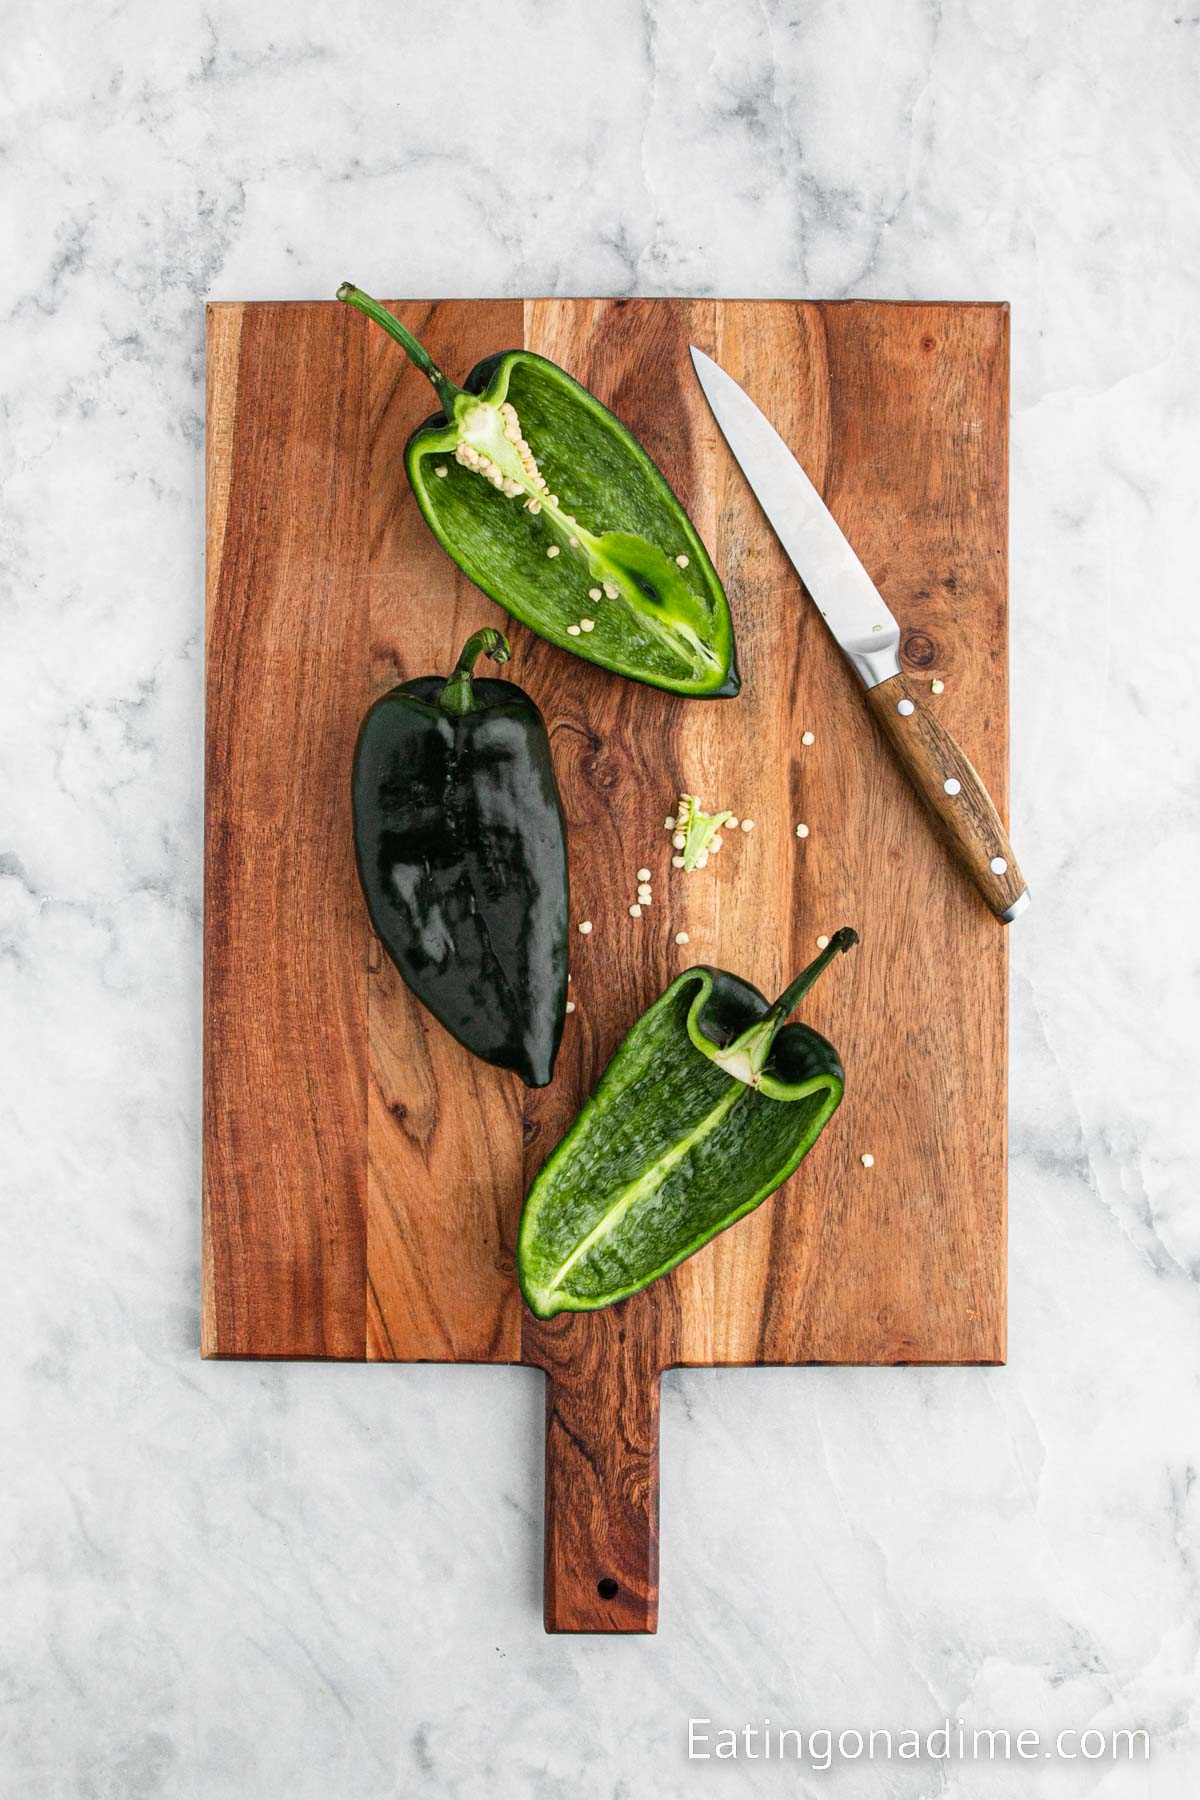 Preparing the poblano peppers by cutting and removing seeds on a cutting board